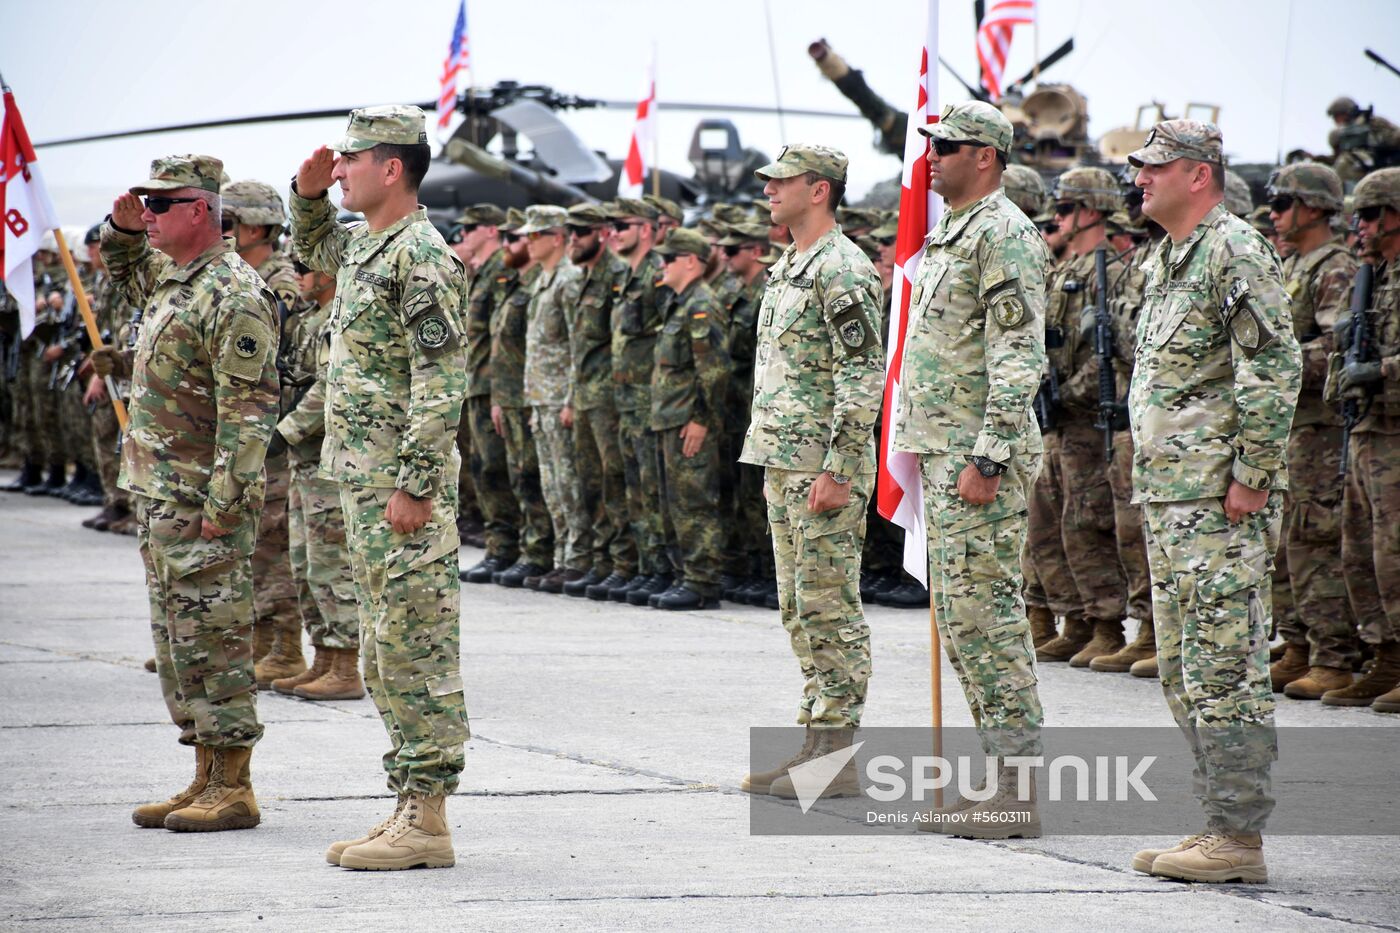 Kick-off ceremony for Noble Partner military exercise in Georgia